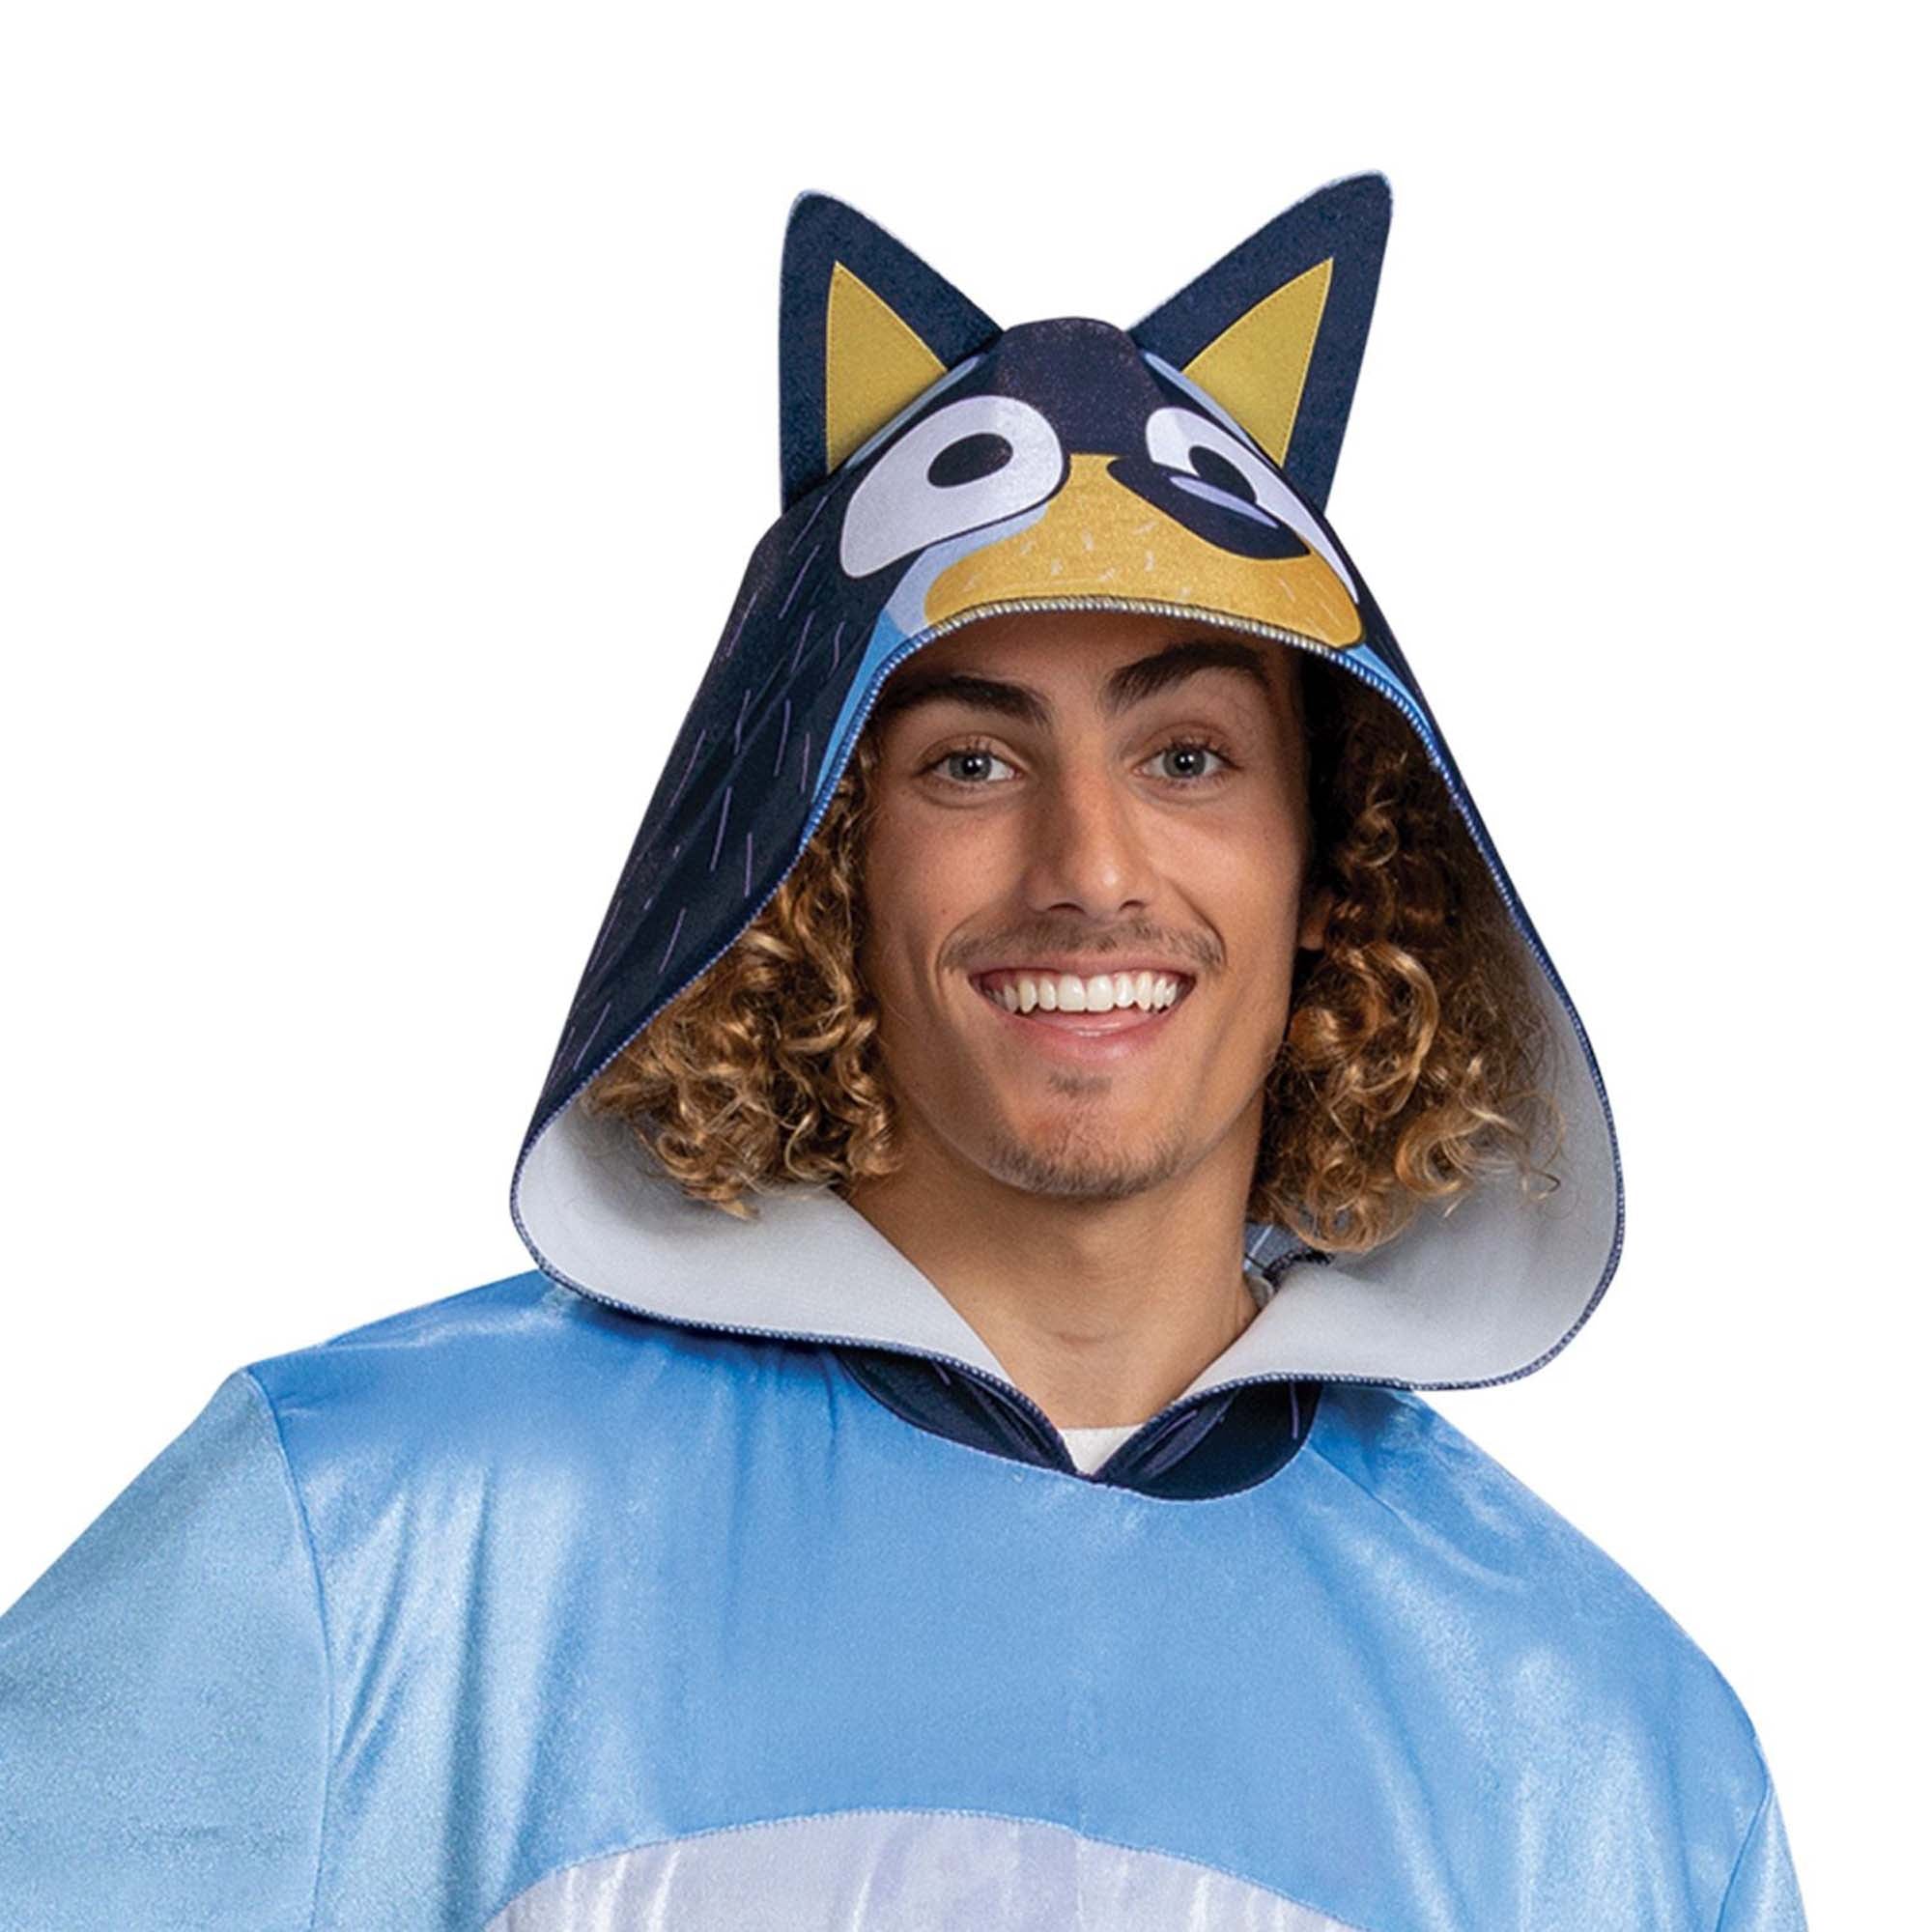 http://www.party-expert.com/cdn/shop/files/disguise-toy-sport-costumes-bluey-bandit-hooded-jumpsuit-costume-for-adults-192995149724-33203440419002.jpg?v=1684257985&width=2000